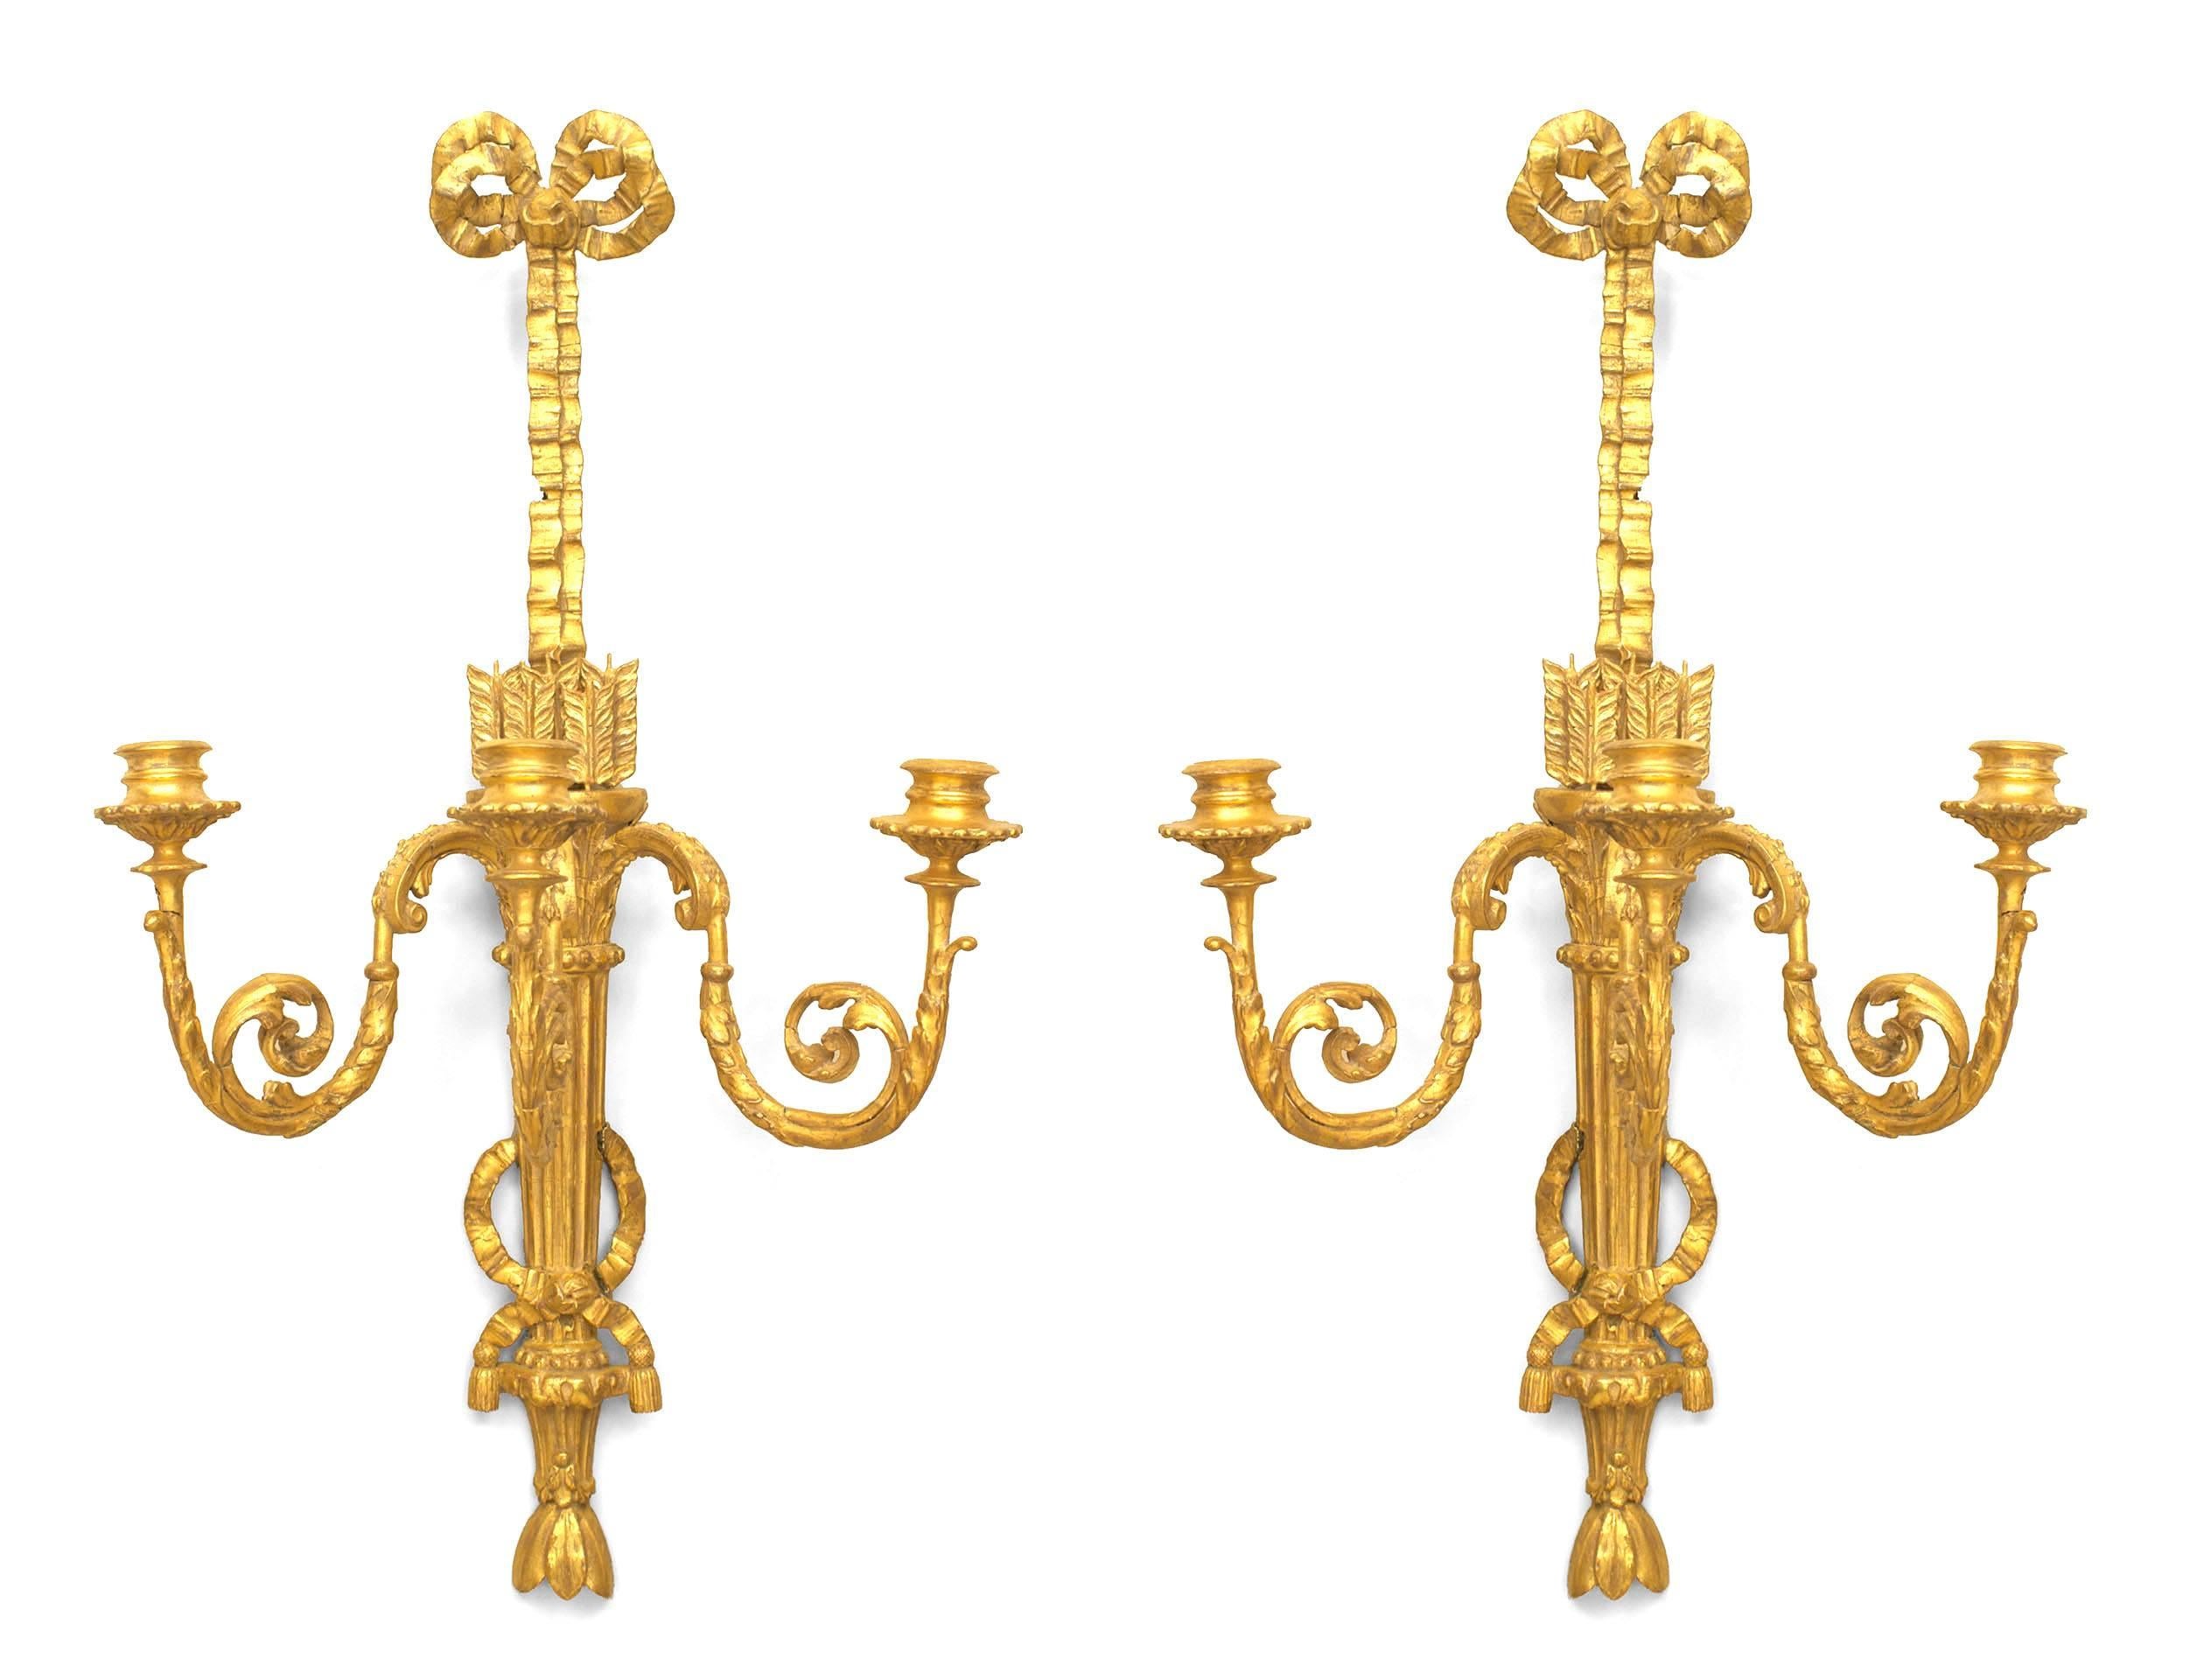 Pair of French Louis XVI (circa 1785) gilt wood three scroll arm wall sconces with a bow knot top and a design with arrows in a quiver. (PRICED AS Pair)
